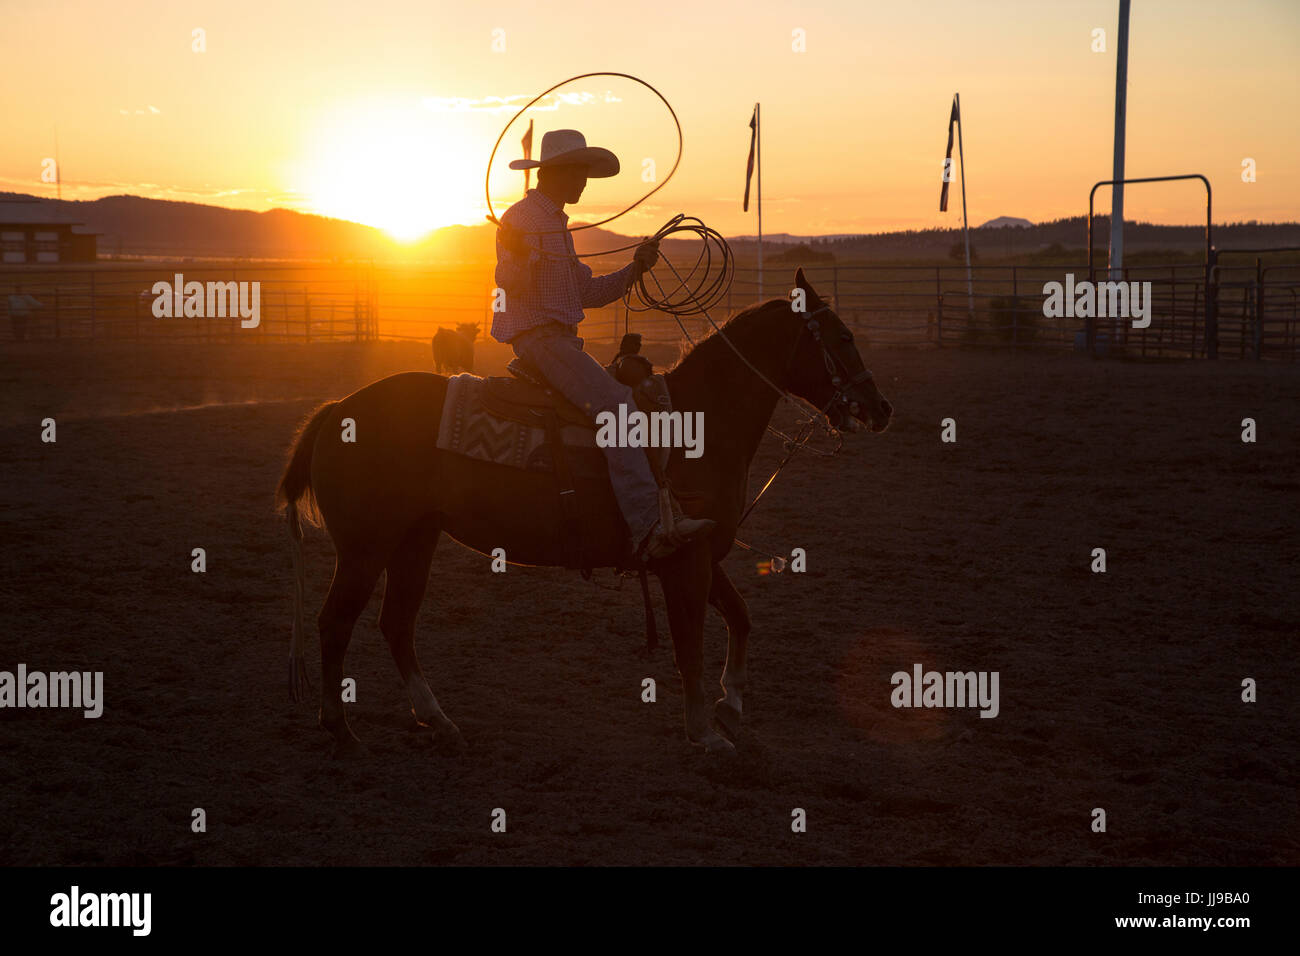 A cowboy tosses a lasso in the air at sunset during a rodeo in Utah. Stock Photo